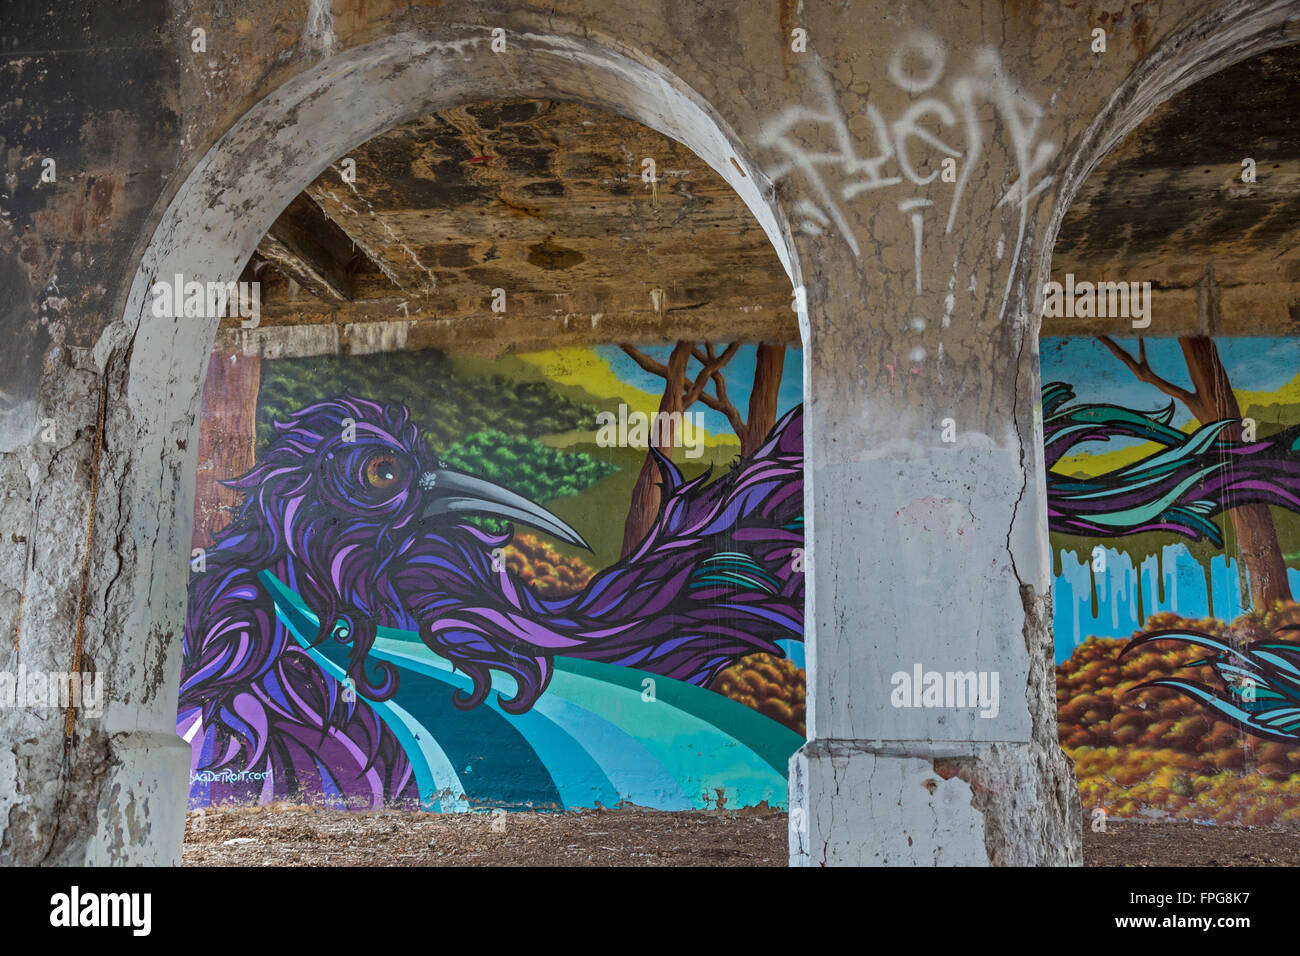 Detroit, Michigan - A painting called 'Nature's Wrath' by Malt under a decaying bridge on the Dequindre Cut Greenway. Stock Photo